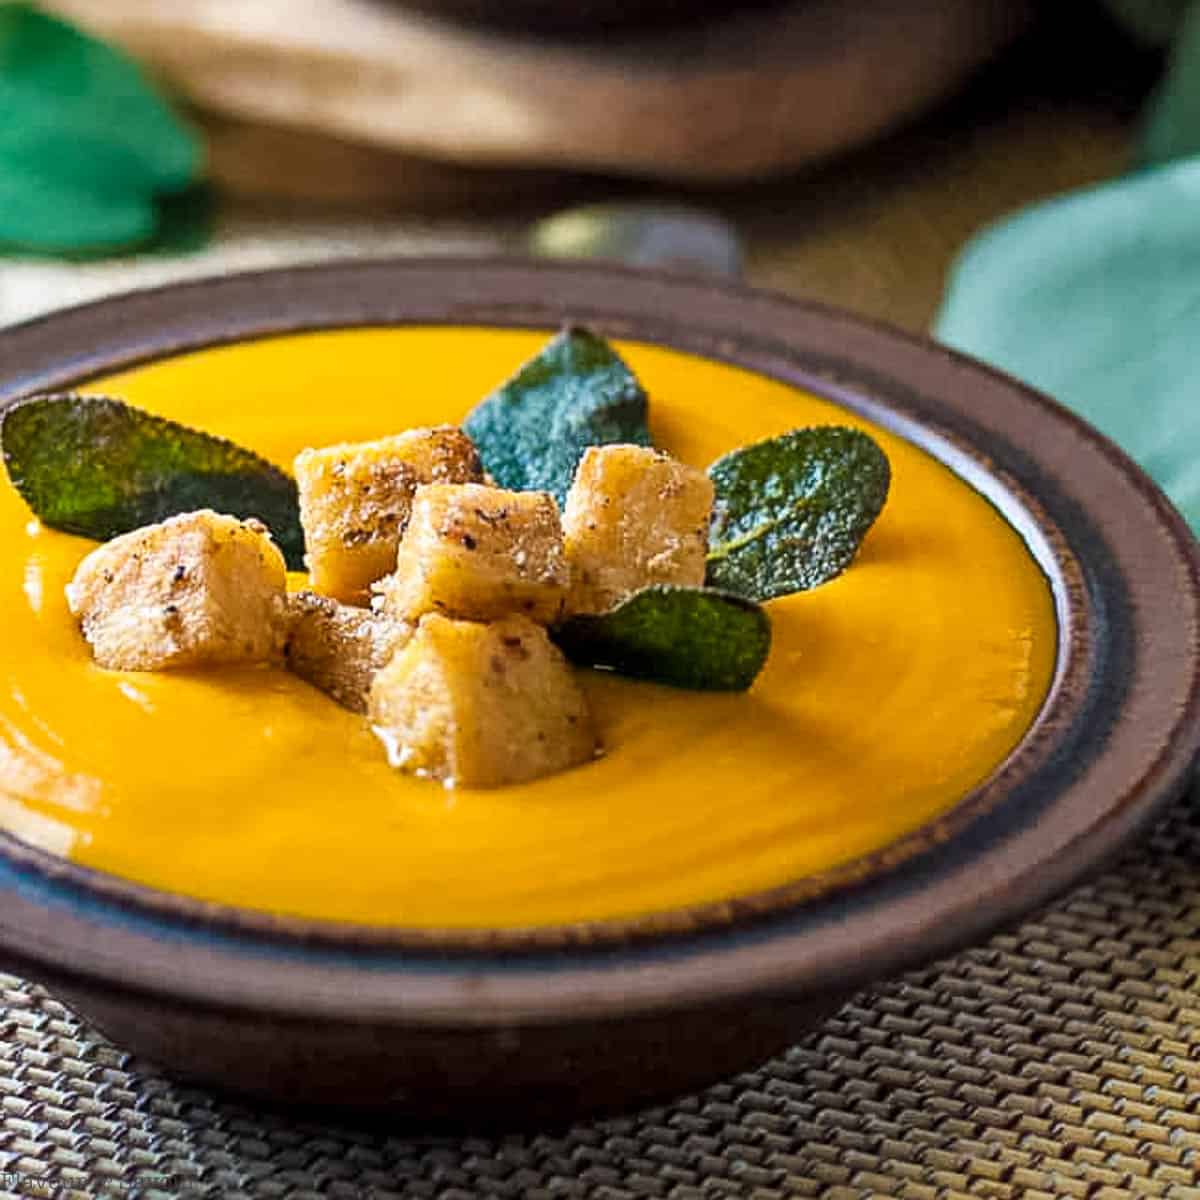 polenta croutons and sage leaves on a bowl of chipotle sweet potato soup